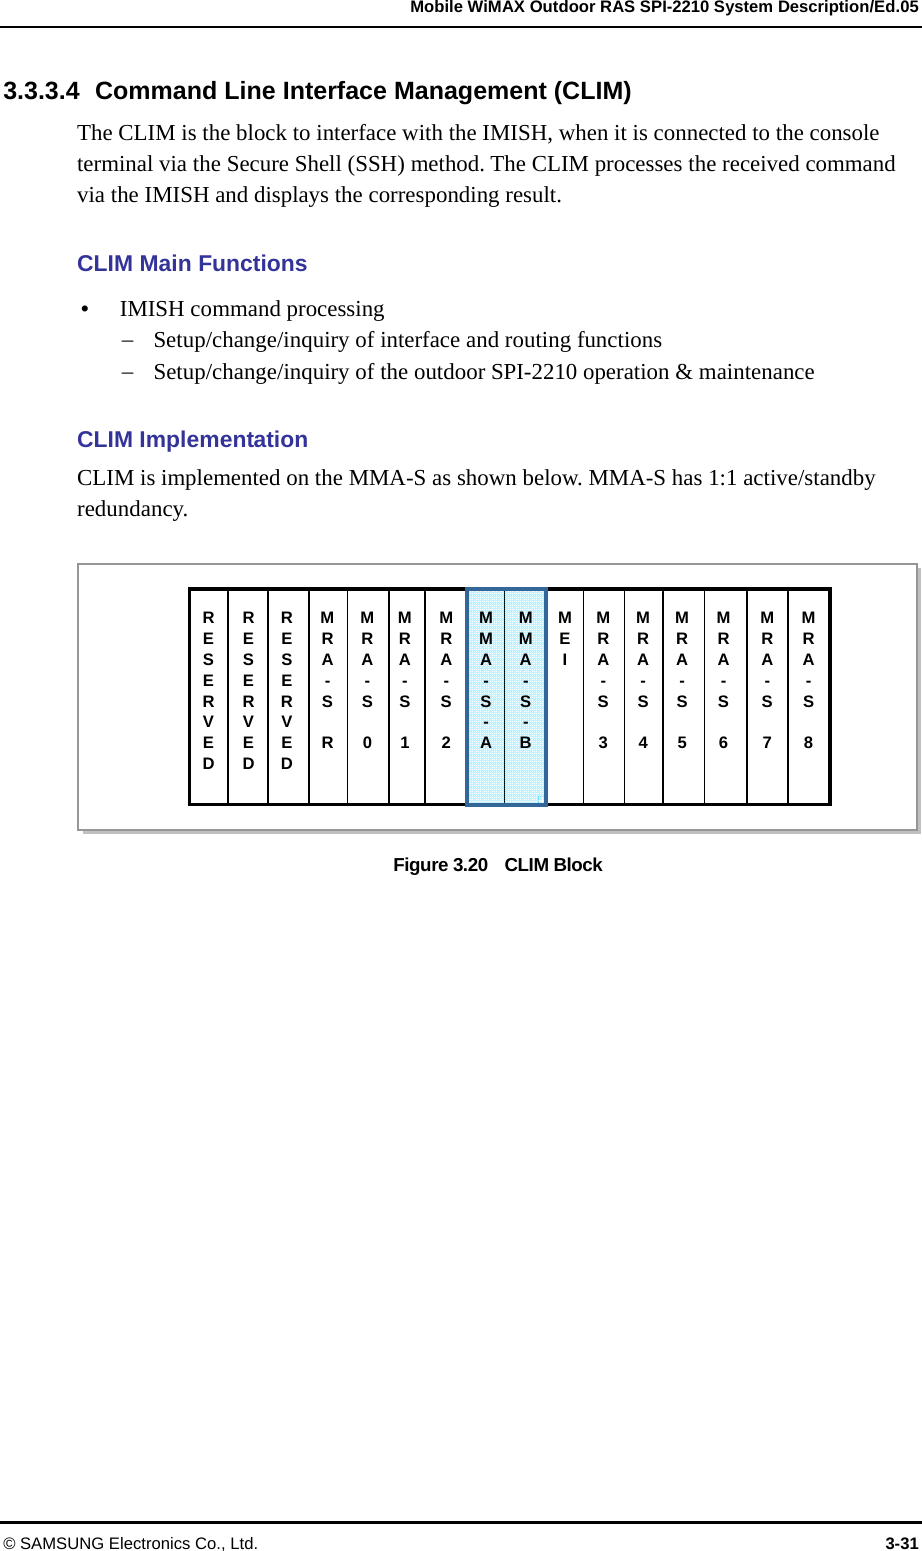   Mobile WiMAX Outdoor RAS SPI-2210 System Description/Ed.05 © SAMSUNG Electronics Co., Ltd.  3-31 3.3.3.4  Command Line Interface Management (CLIM) The CLIM is the block to interface with the IMISH, when it is connected to the console terminal via the Secure Shell (SSH) method. The CLIM processes the received command via the IMISH and displays the corresponding result.    CLIM Main Functions  IMISH command processing  Setup/change/inquiry of interface and routing functions  Setup/change/inquiry of the outdoor SPI-2210 operation &amp; maintenance  CLIM Implementation CLIM is implemented on the MMA-S as shown below. MMA-S has 1:1 active/standby redundancy.  Figure 3.20    CLIM Block  RESERVED MRA- S  R MMA-S- AMMA-S- BMEI RESERVED RESERVED MRA- S 0MRA- S 1MRA- S 2MRA- S 3MRA- S 4MRA- S 5MRA- S  6 MRA- S  7 MRA- S  8 